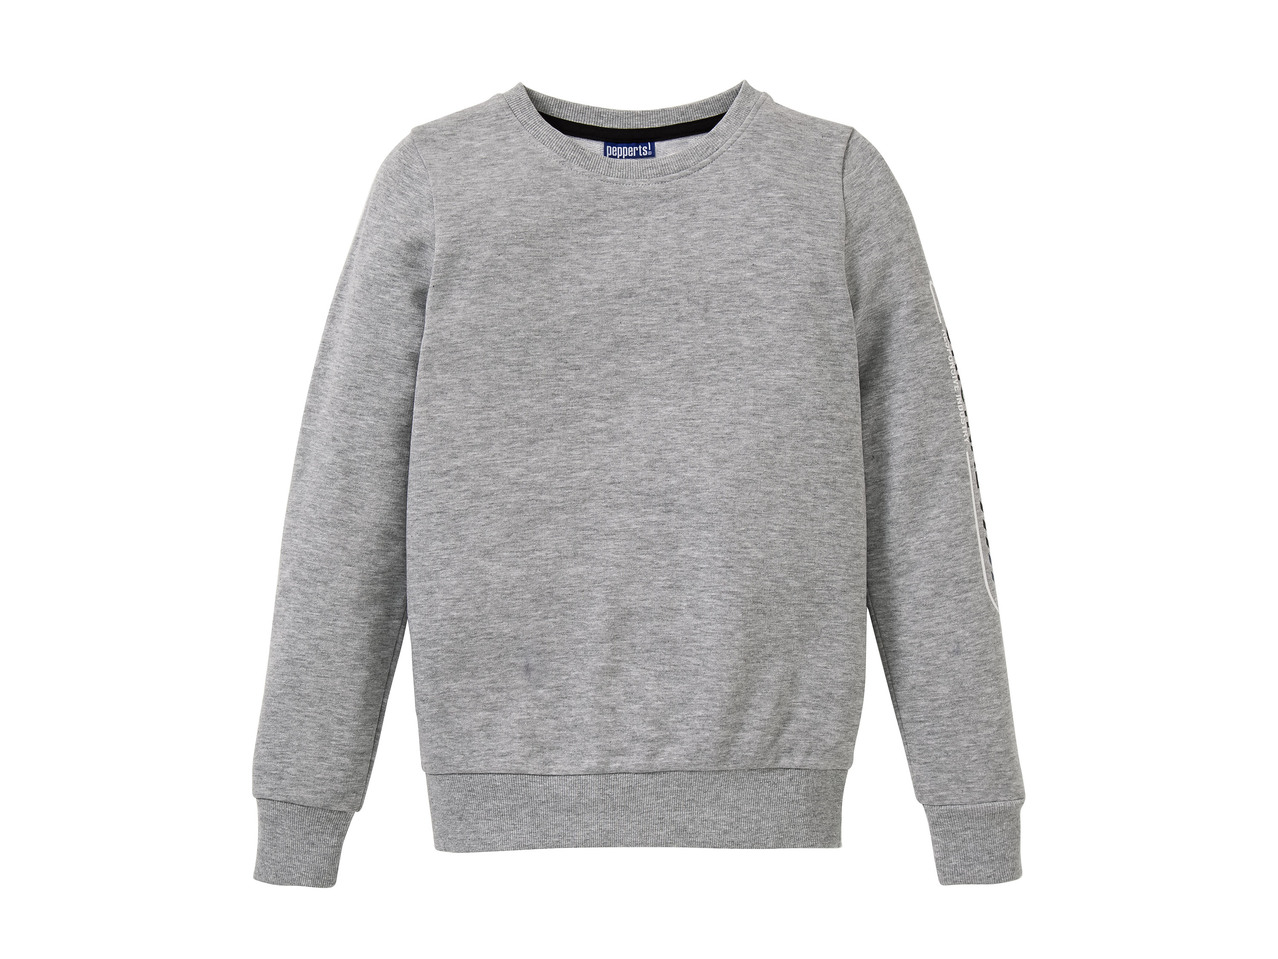 PEPPERTS(R) Camisola Sweat